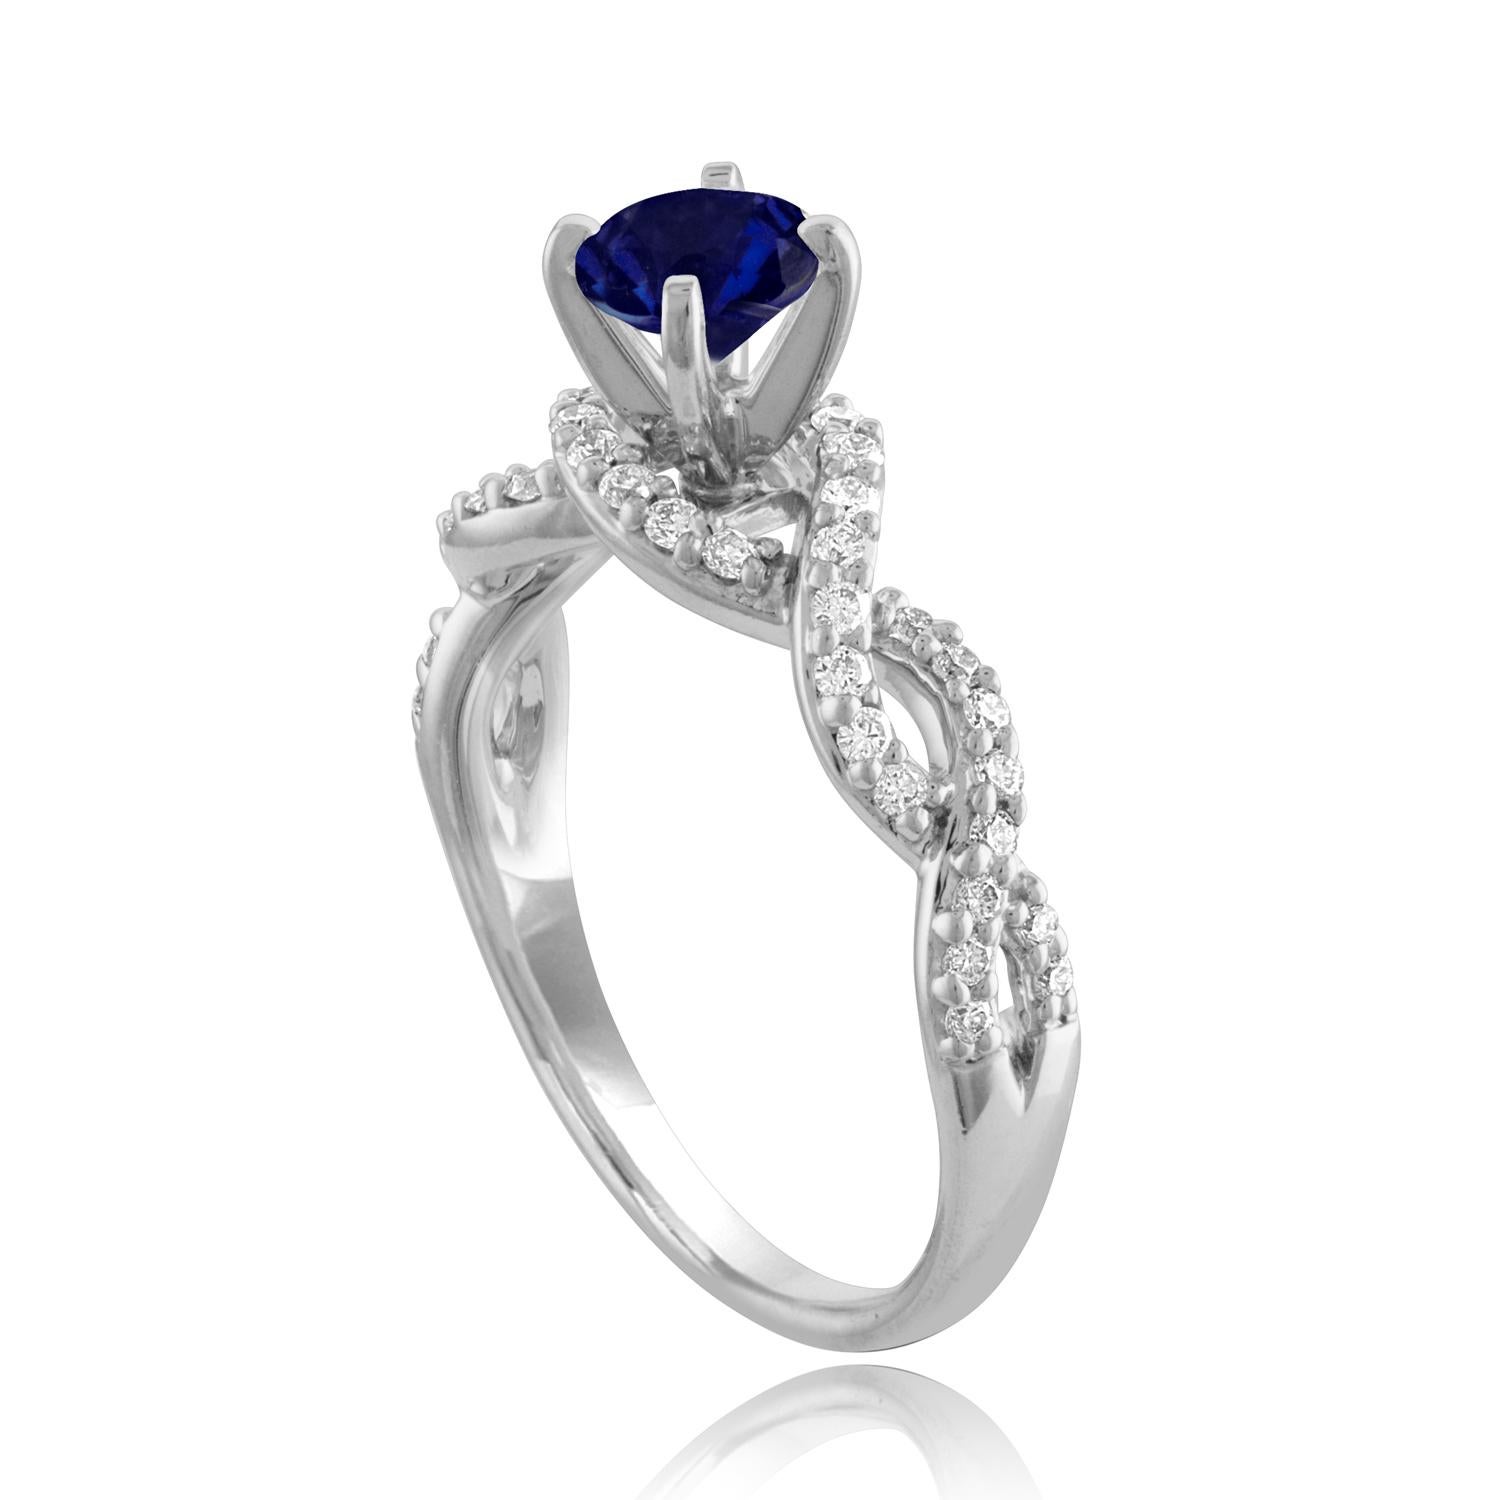 Beautiful Infinity Shank Sapphire Ring
The ring is 18K White Gold
The Center Stone is a Round Blue Sapphire 0.88 Carats
The Sapphire is AGL Certified Heated
There are 0.33 Carats in Diamonds F/G VS/SI
The ring is a size 6.75, sizable.
The ring